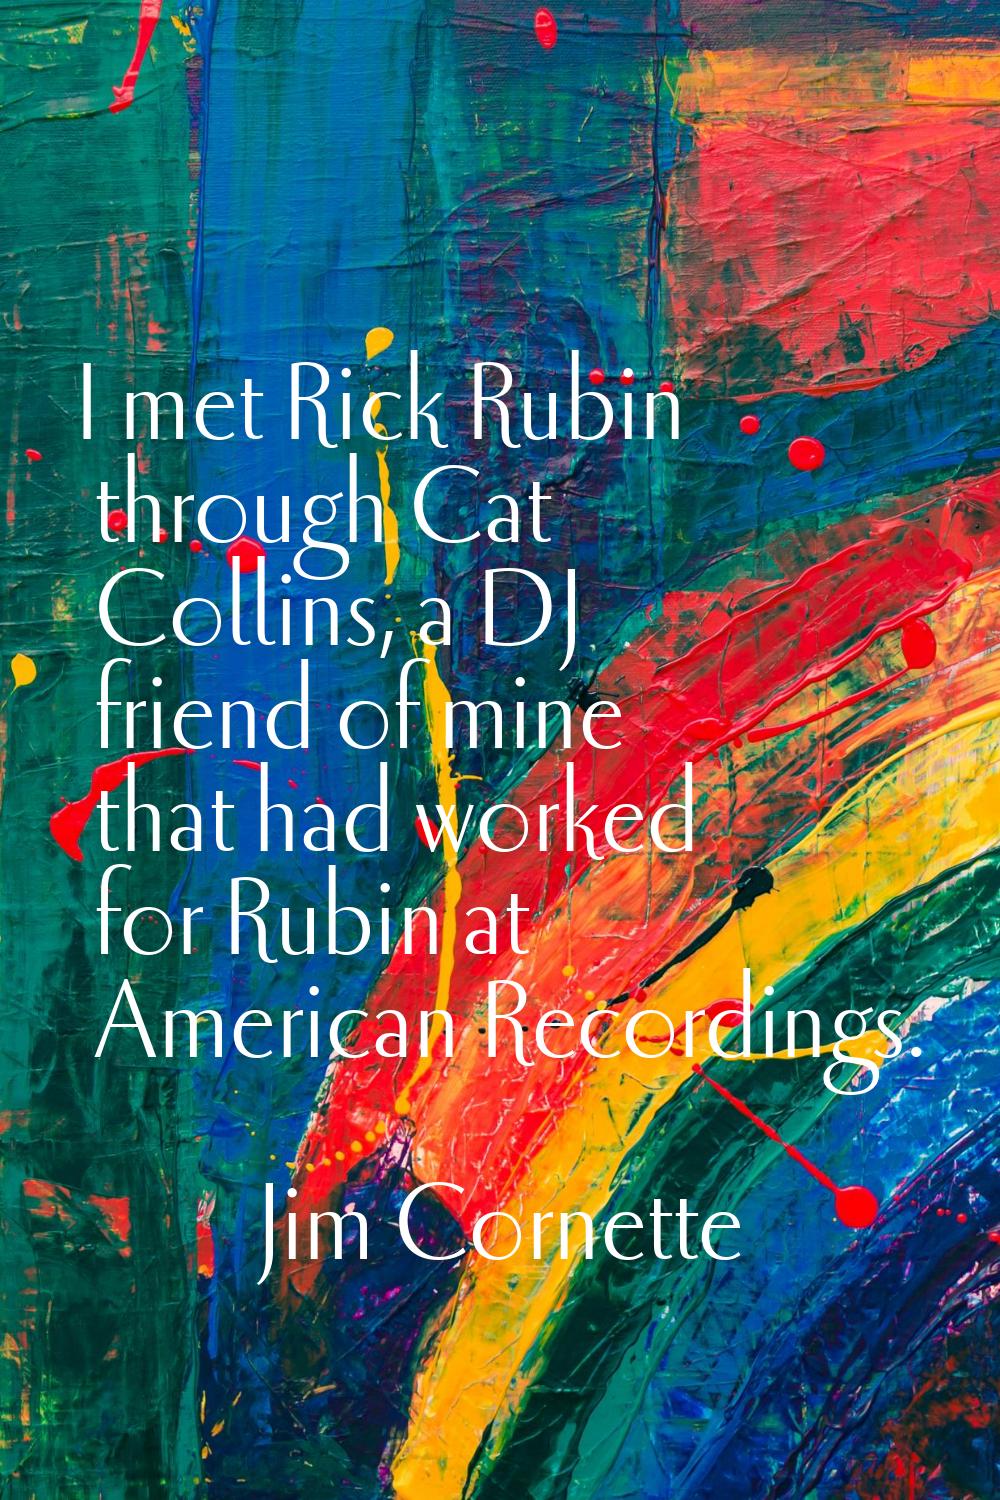 I met Rick Rubin through Cat Collins, a DJ friend of mine that had worked for Rubin at American Rec